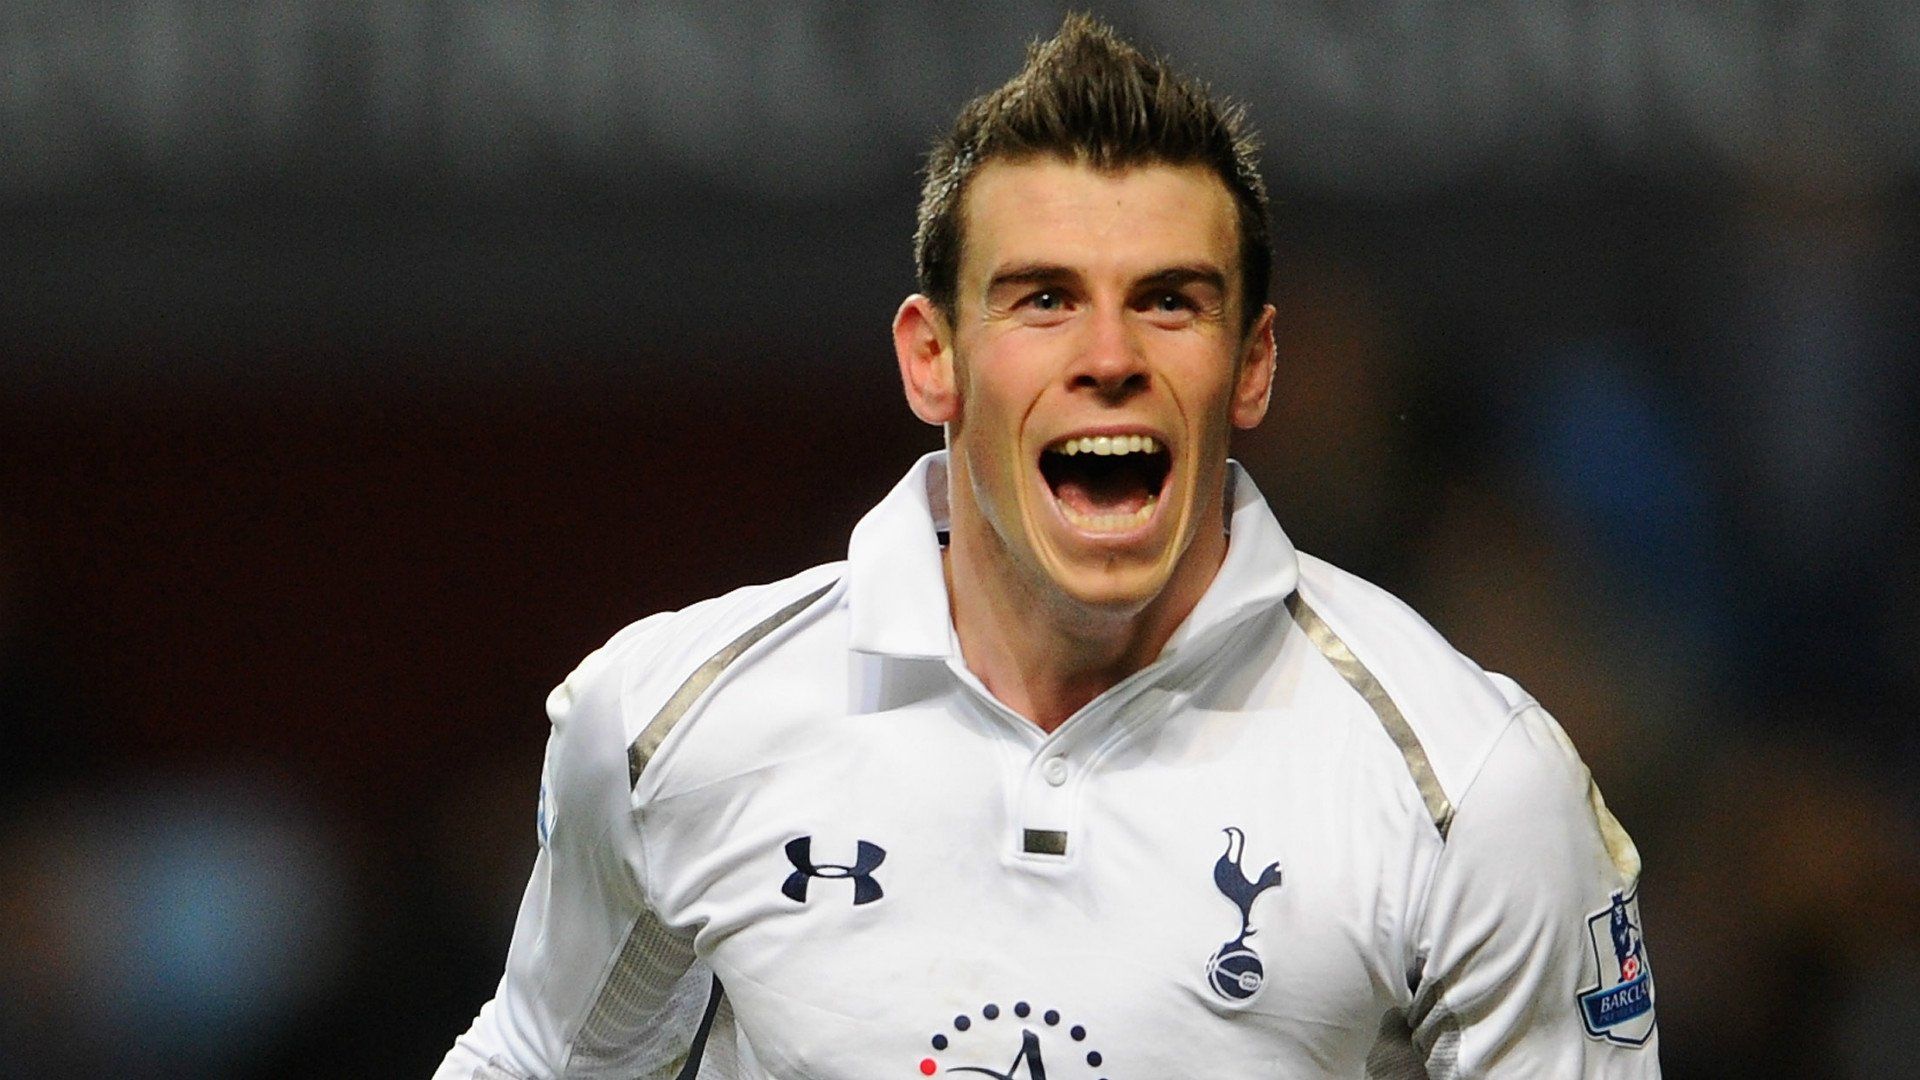 Why did Gareth Bale retire from professional football?